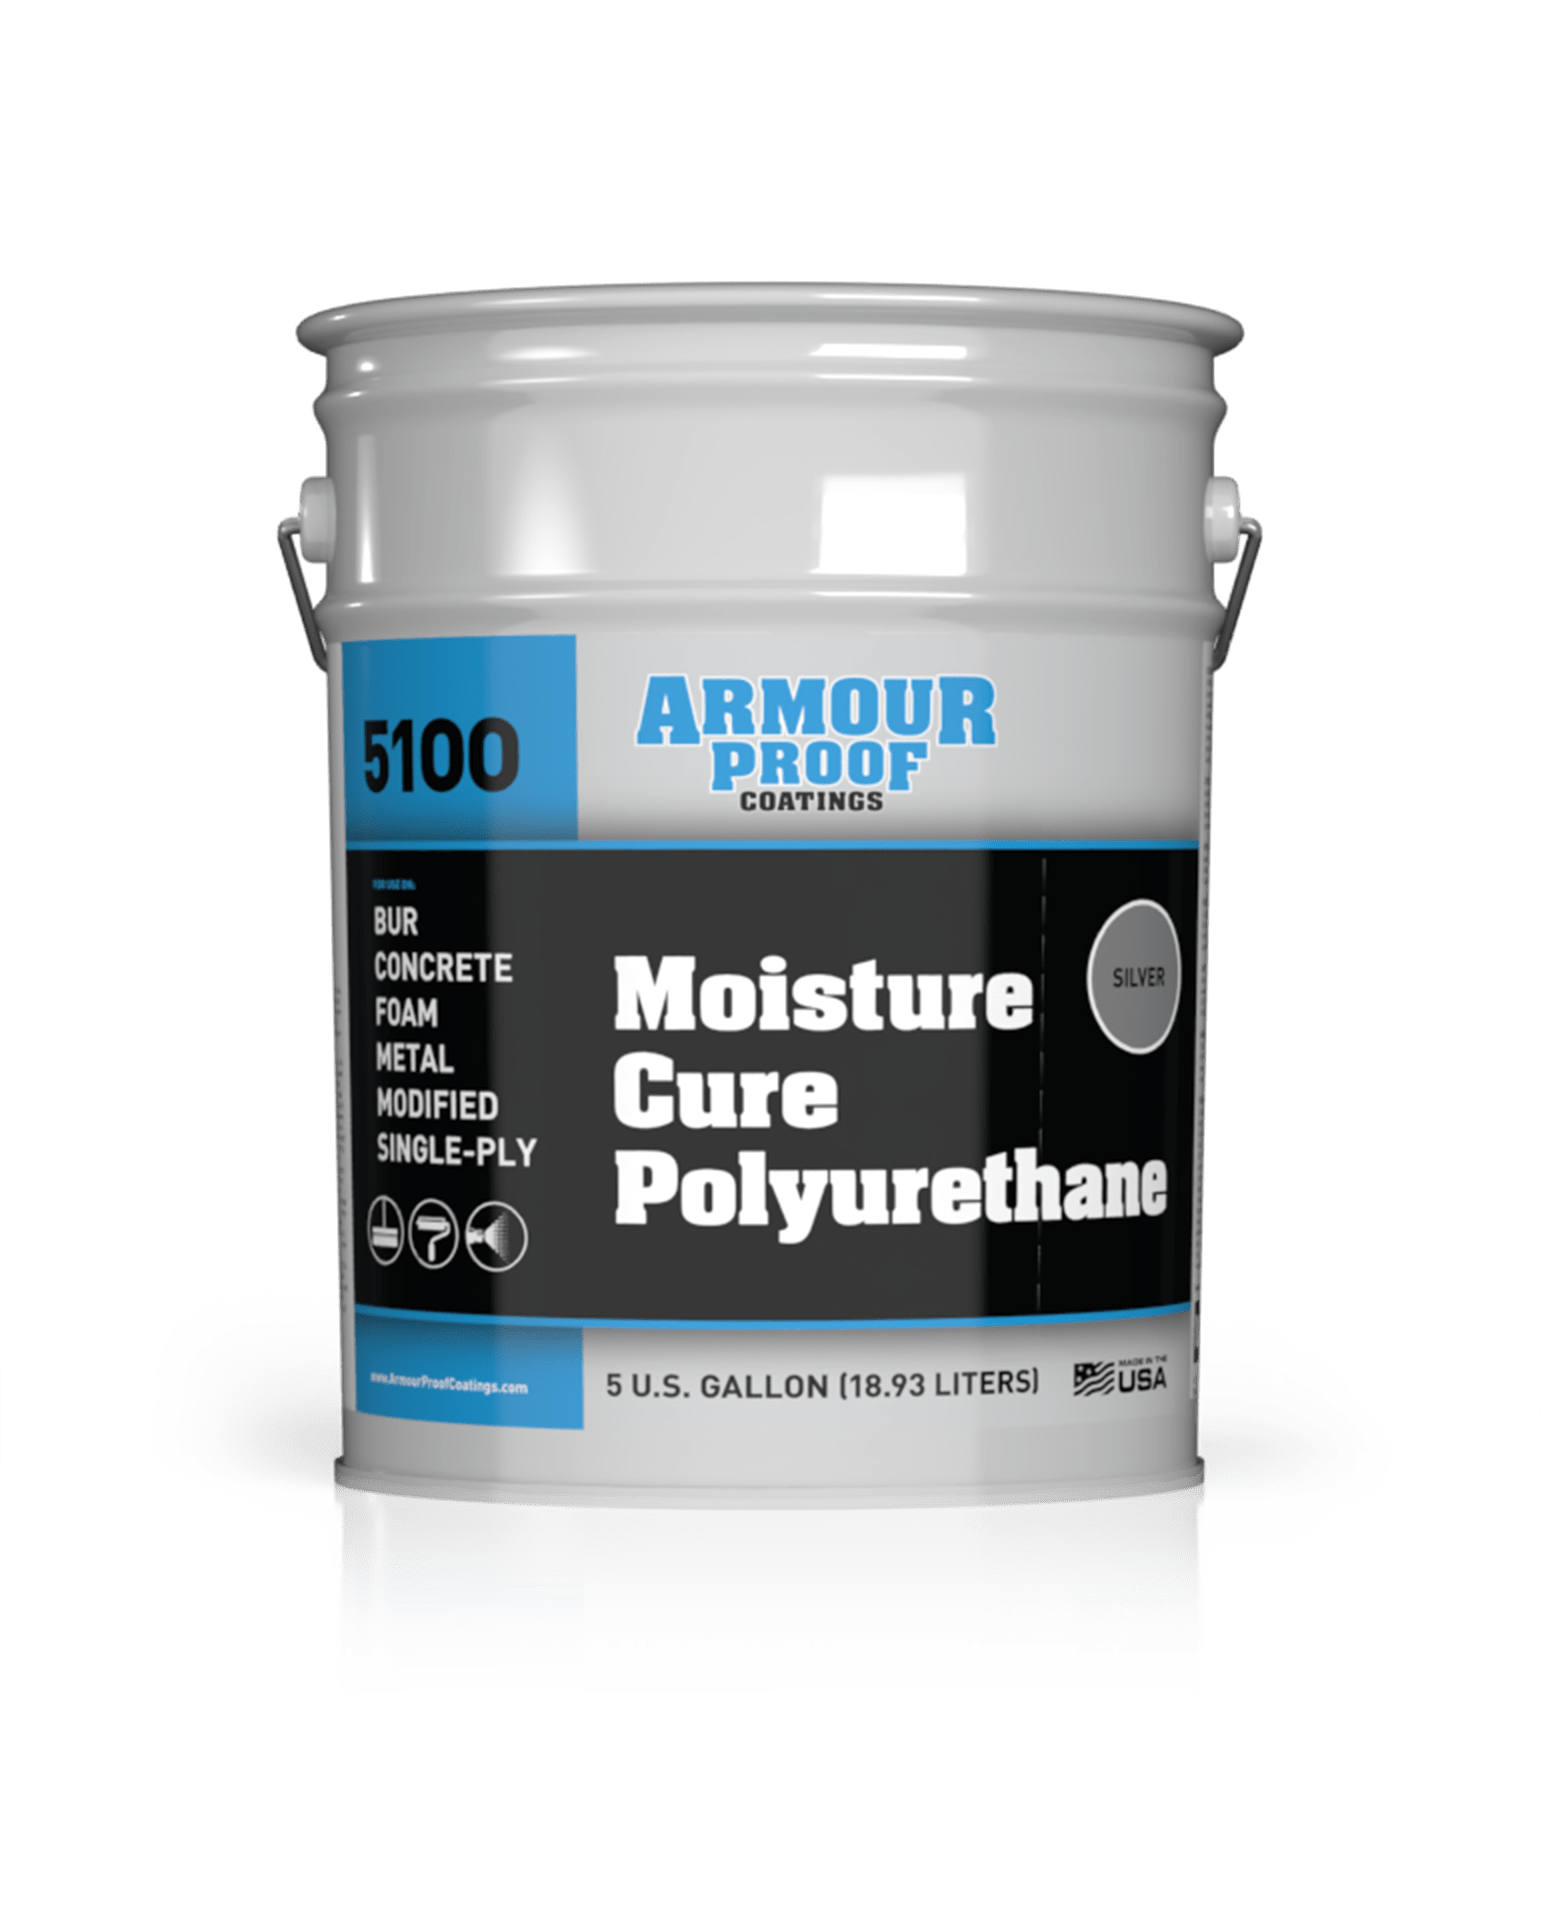 AP-5100 Moisture Cure Polyurethane Roof Coating in 5 Gallon Pail